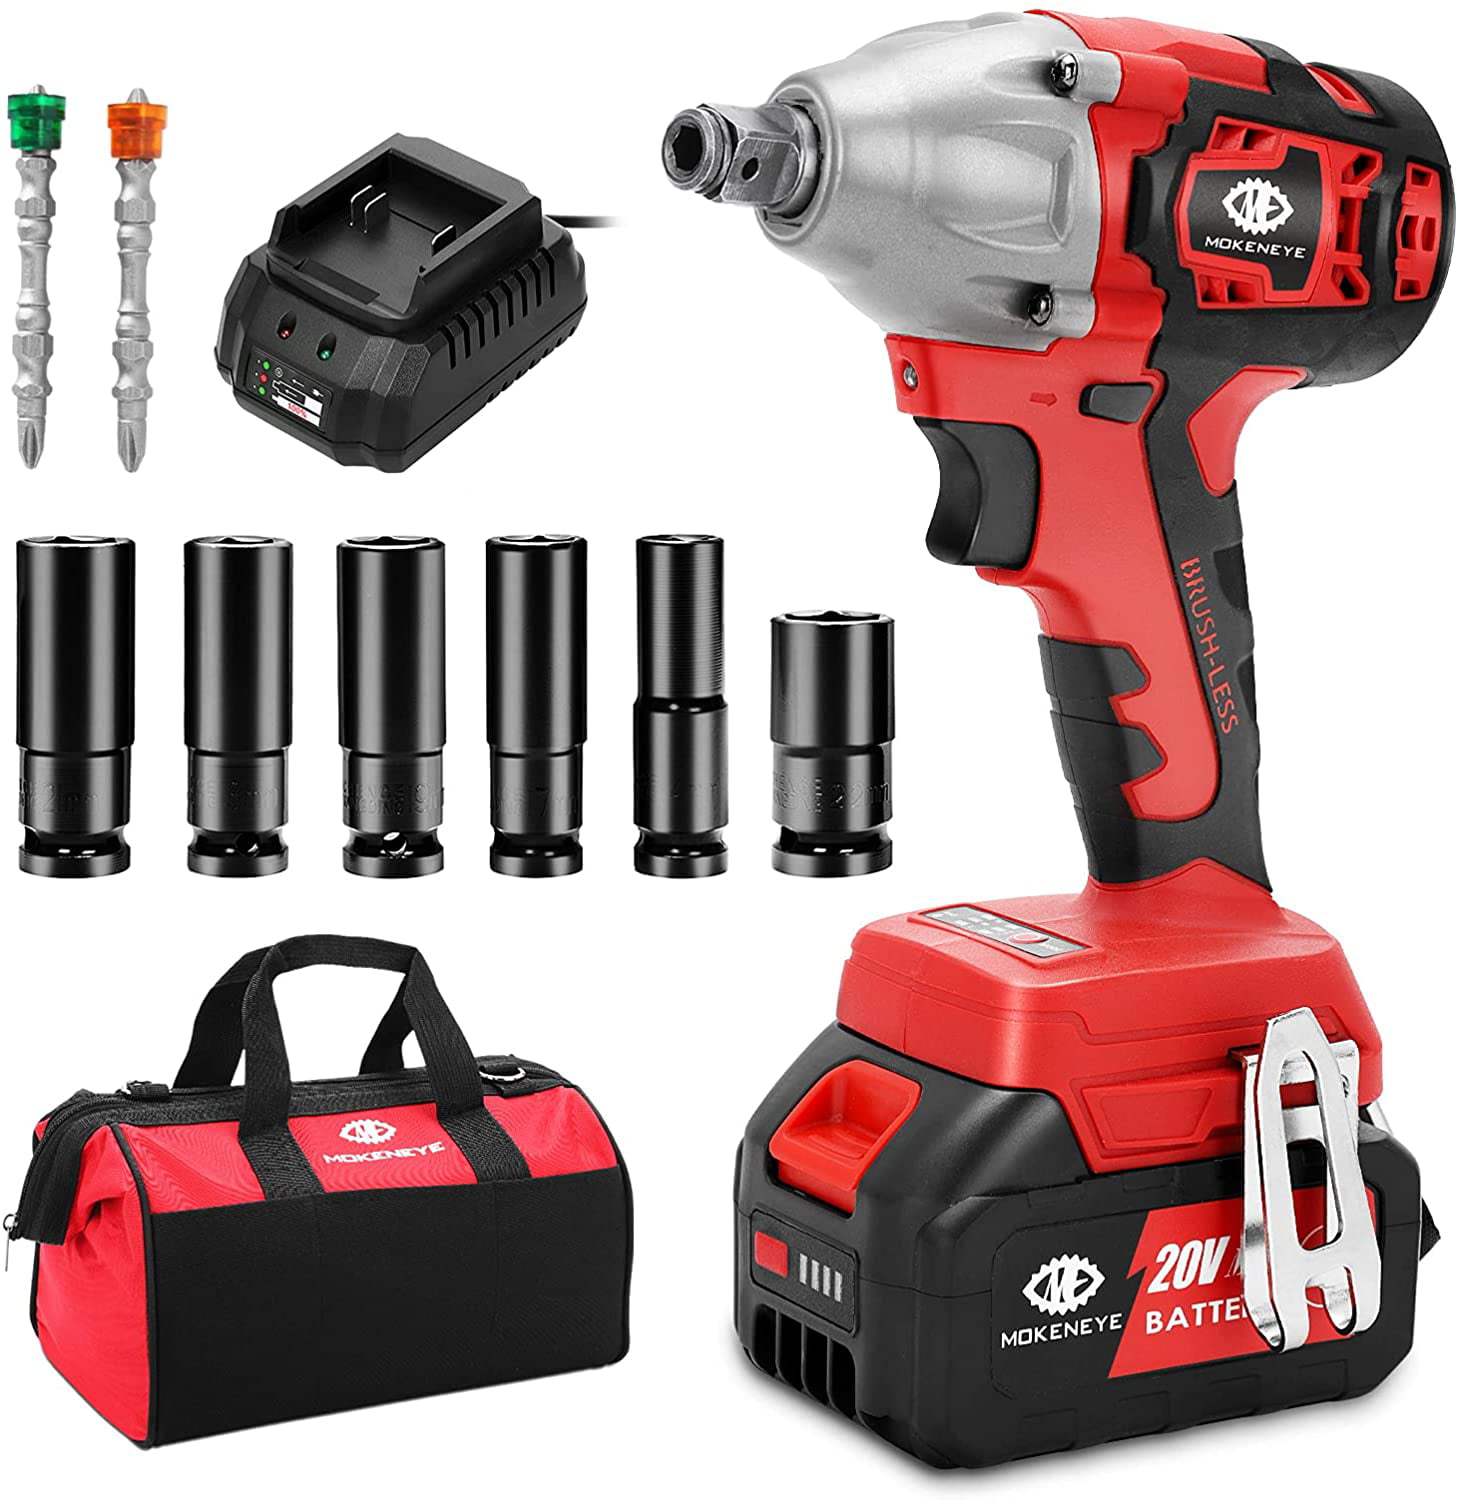 Brushless Cordless Impact Wrench 1/2" Square Impact Wrench 4.0Ah Battery 400Nm 